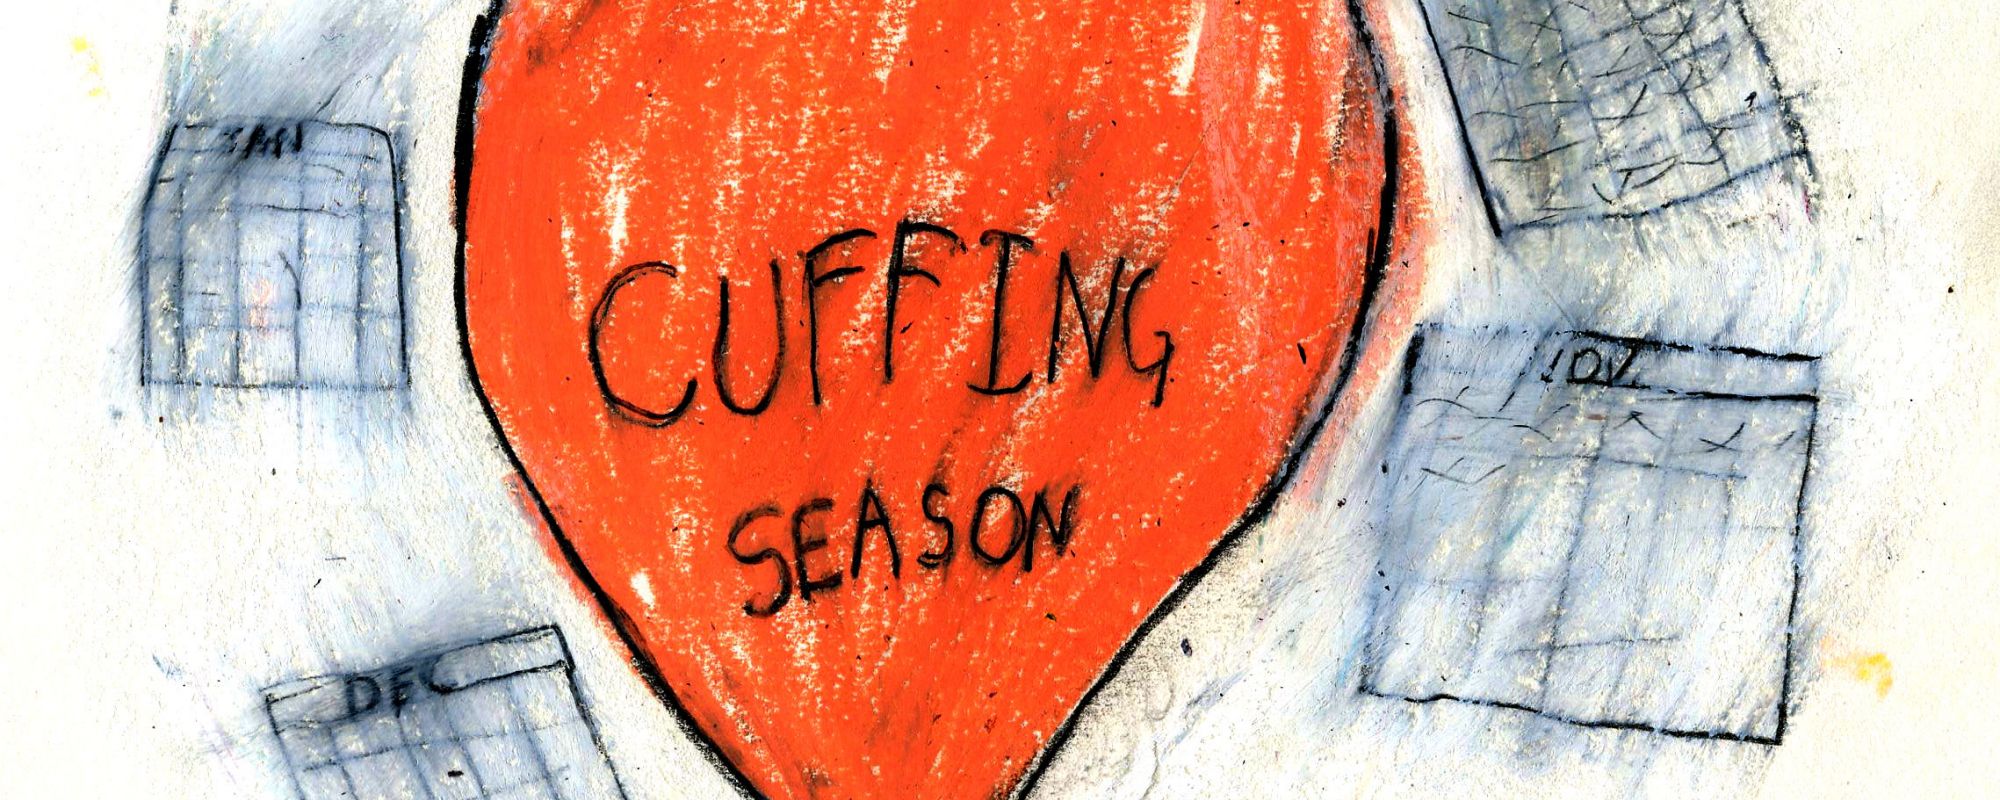 A heart with the words "cuffing season" printed in it, surrounded by calendars